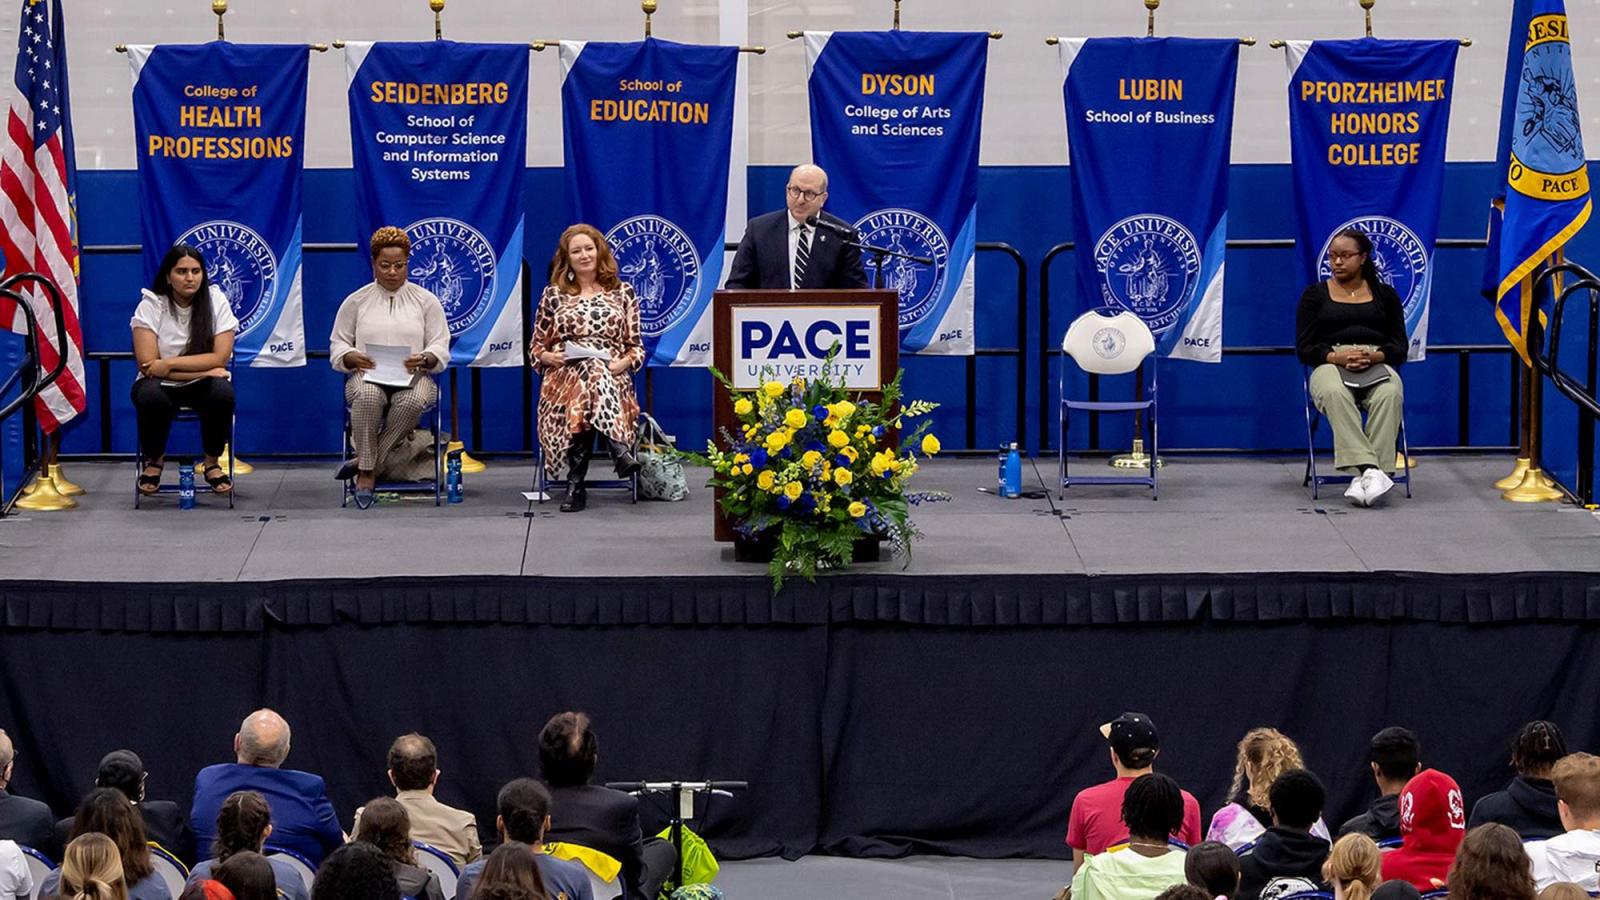 Pace president, Marvin Krislov, speaking on stage at the class of 2026 convocation ceremony.